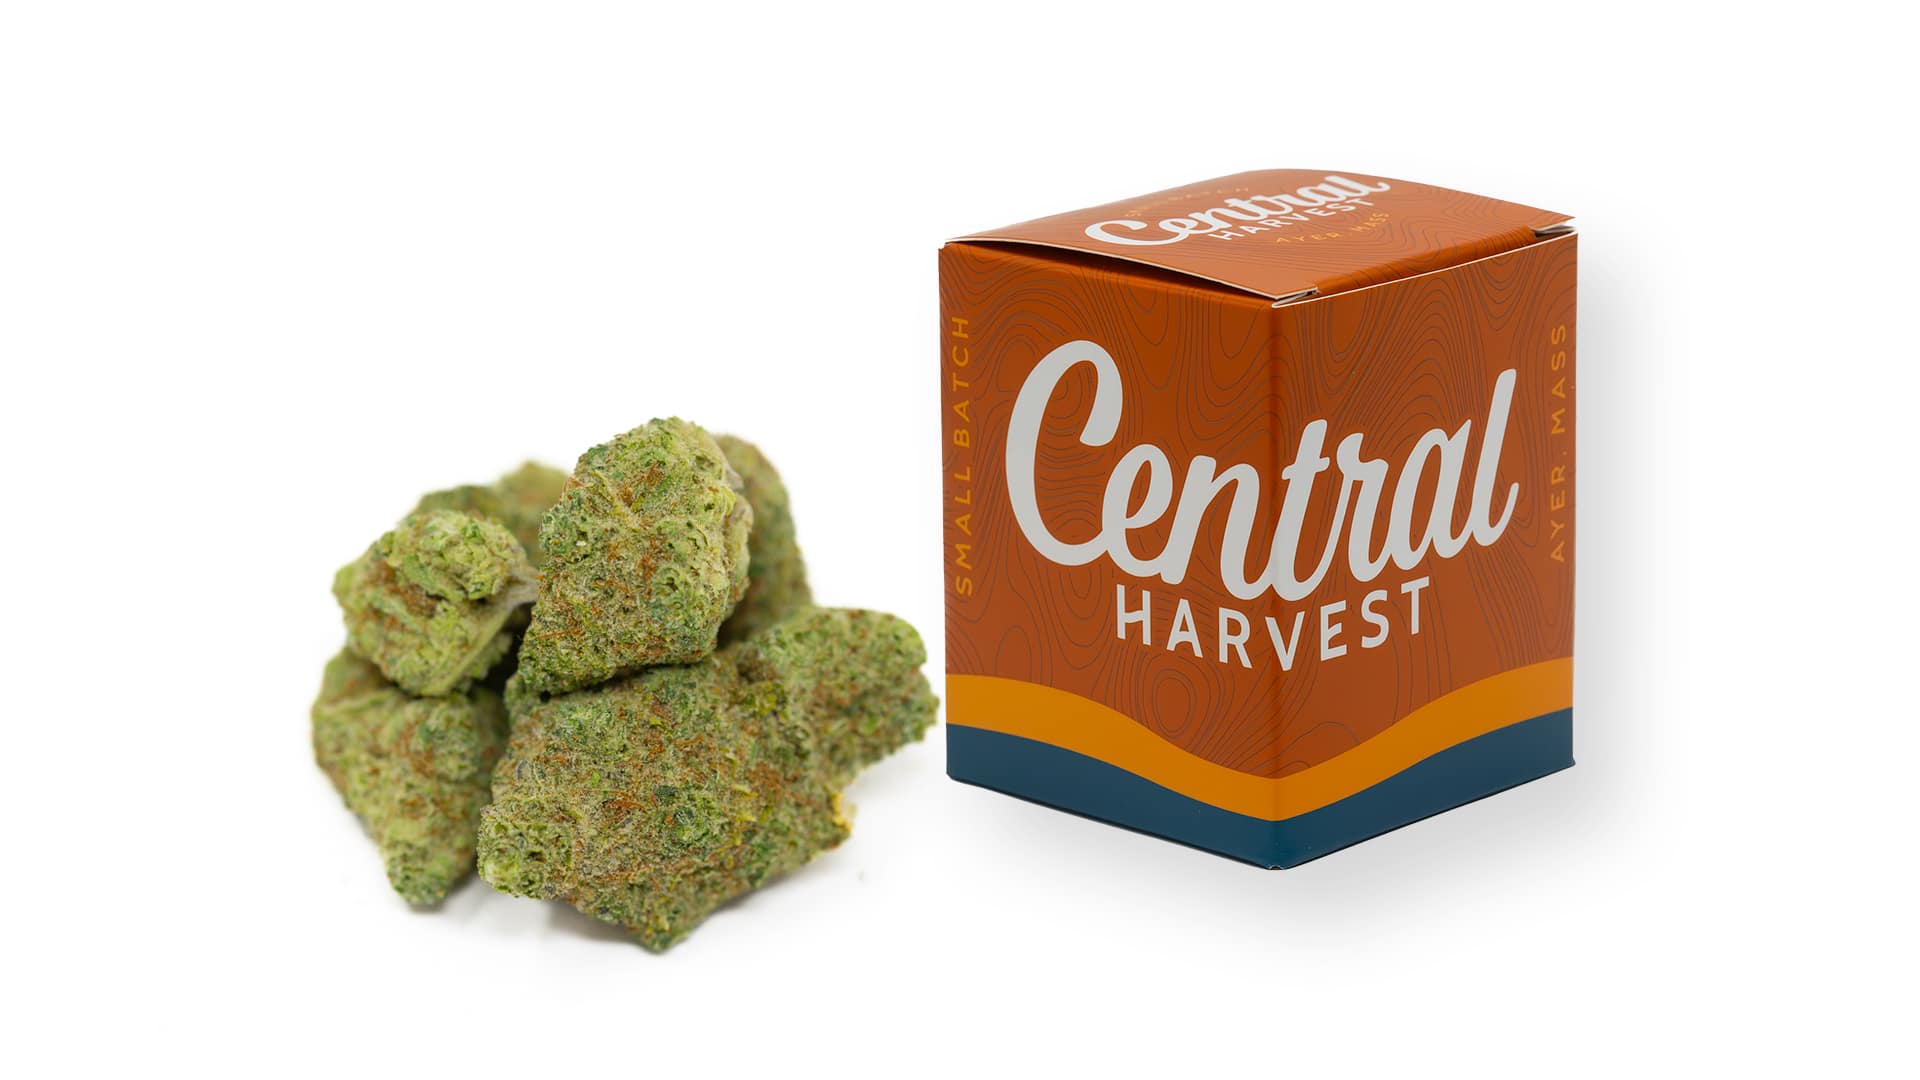 Citradelic Cookies is a High CBD Hybrid Cannabis strain grown by Central Harvest